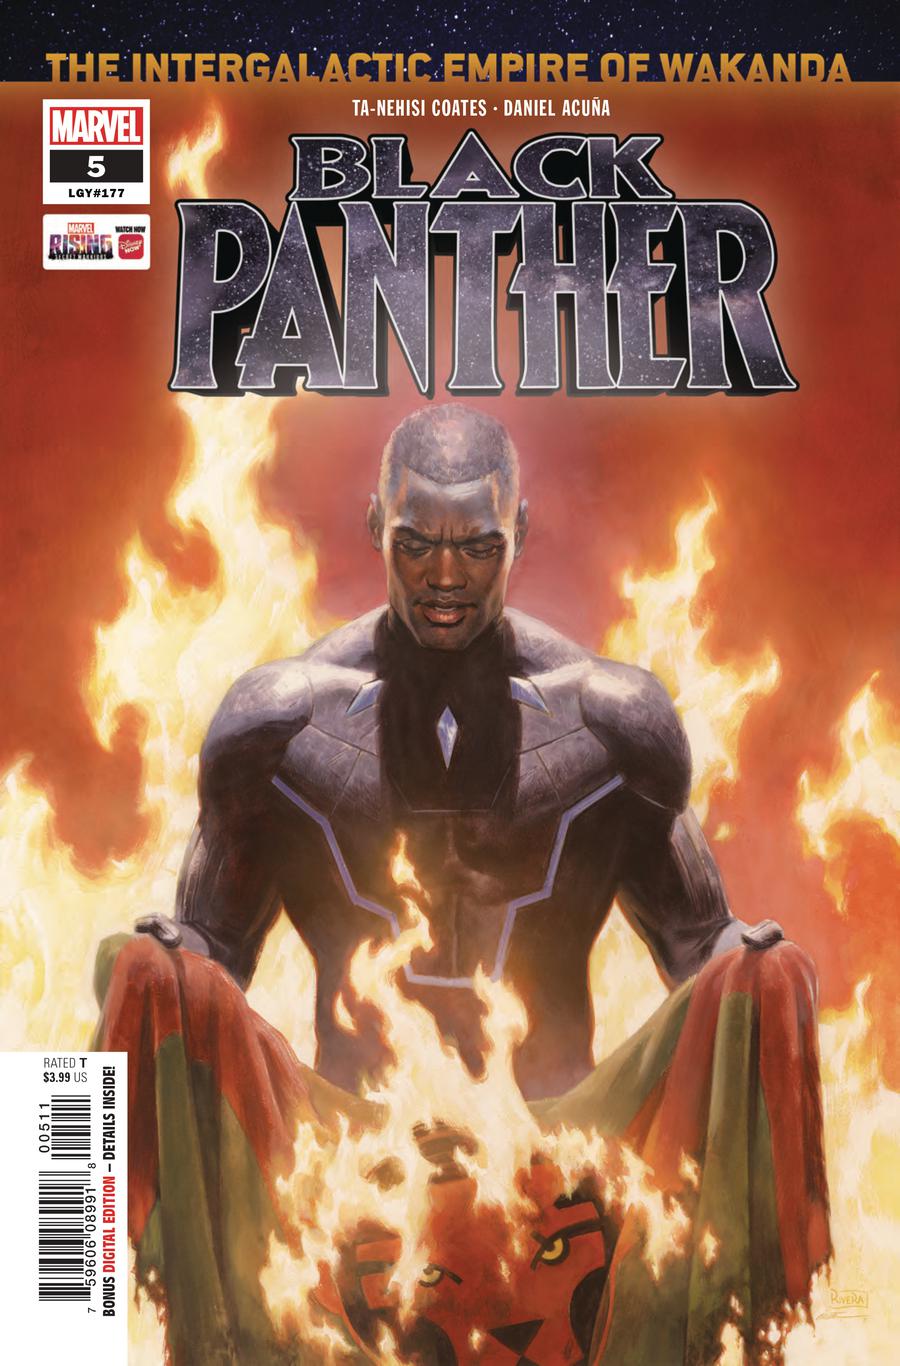 Black Panther Vol 7 #5 Cover A Regular Paolo Rivera & Daniel Acuna Cover